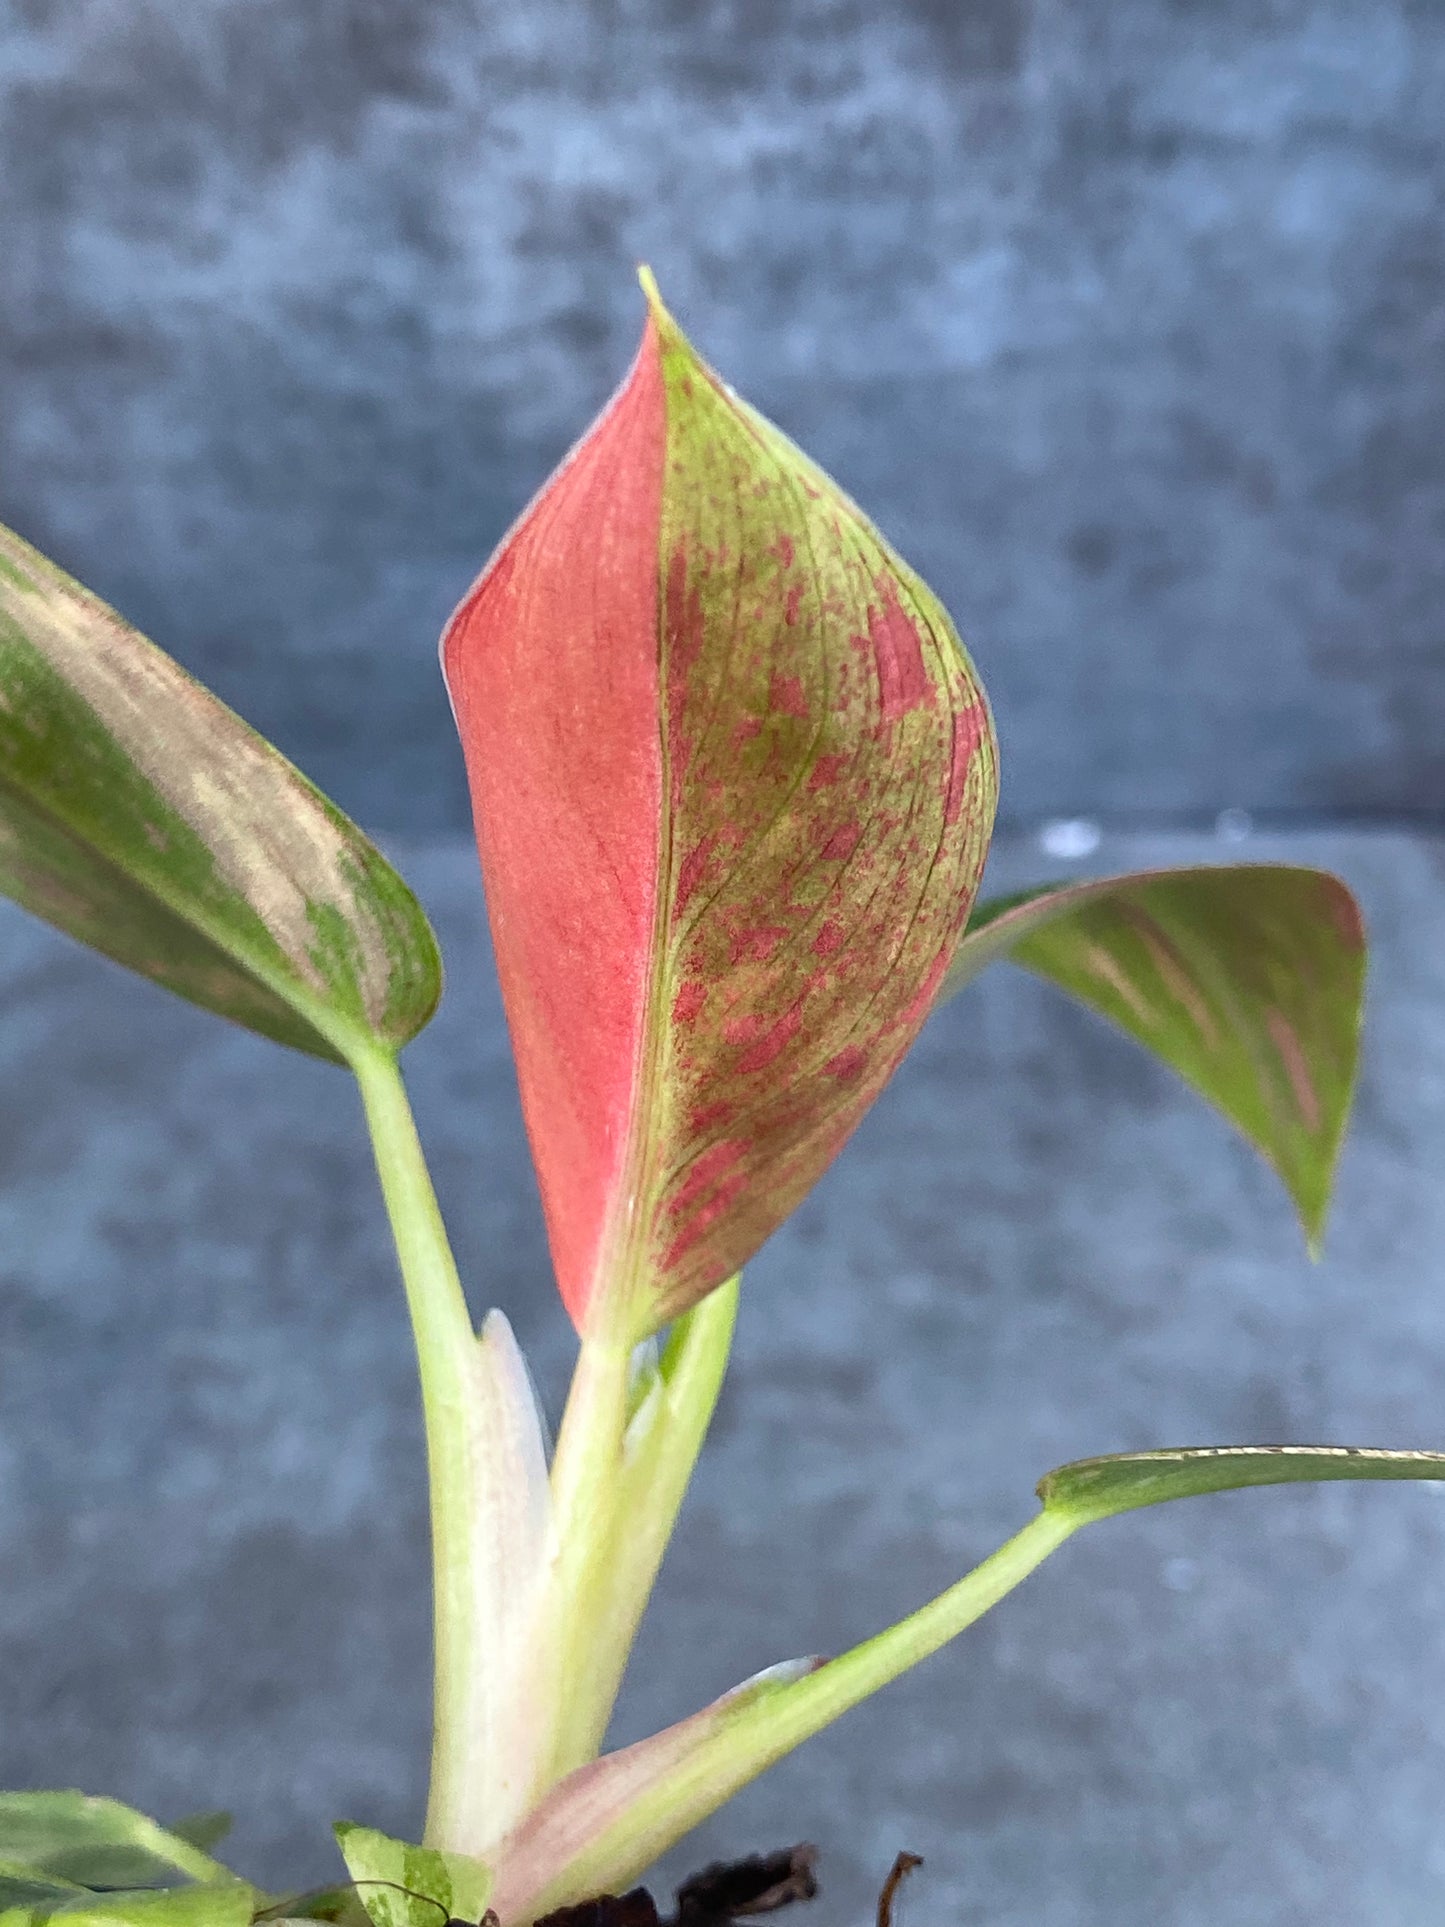 Philodendron Congo Nuclear - Super Hot Coral/Pink Underside!